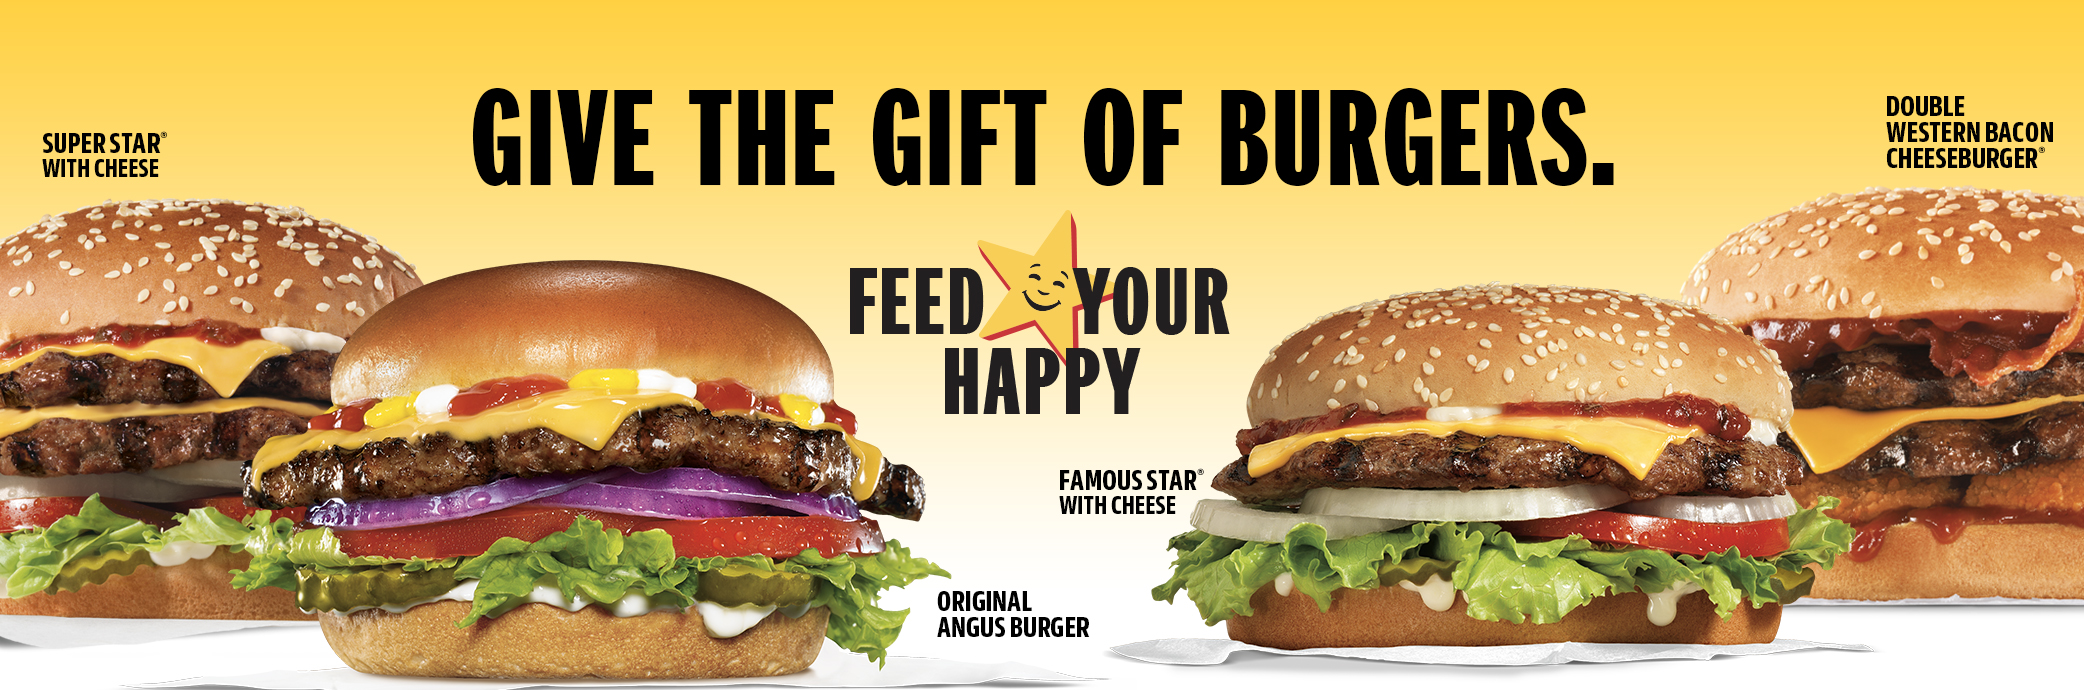 Hardee's or Carl's Jr gift cards 15% off, $20 minimum and $1.50 postage